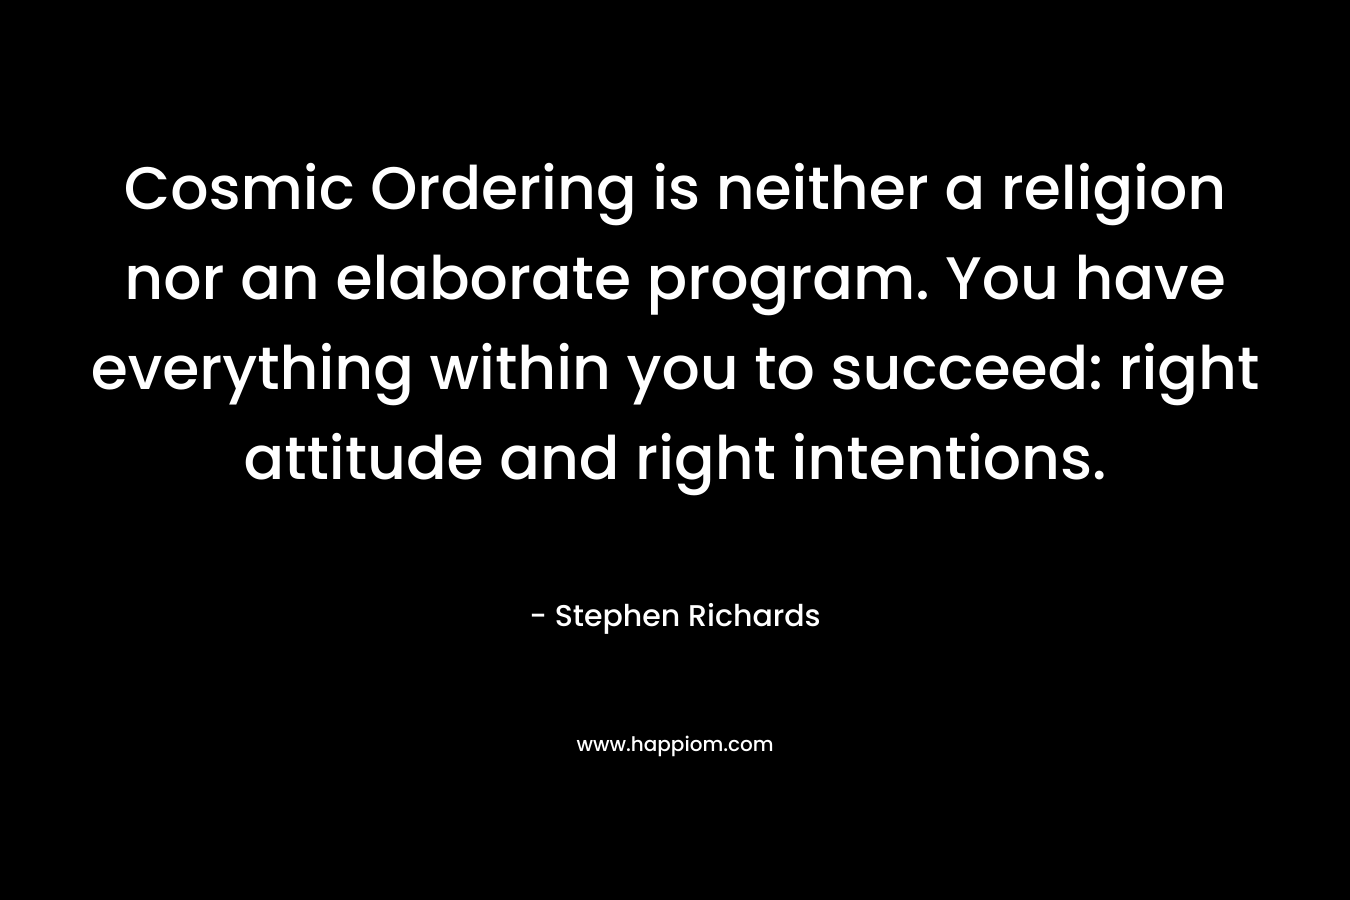 Cosmic Ordering is neither a religion nor an elaborate program. You have everything within you to succeed: right attitude and right intentions. – Stephen Richards